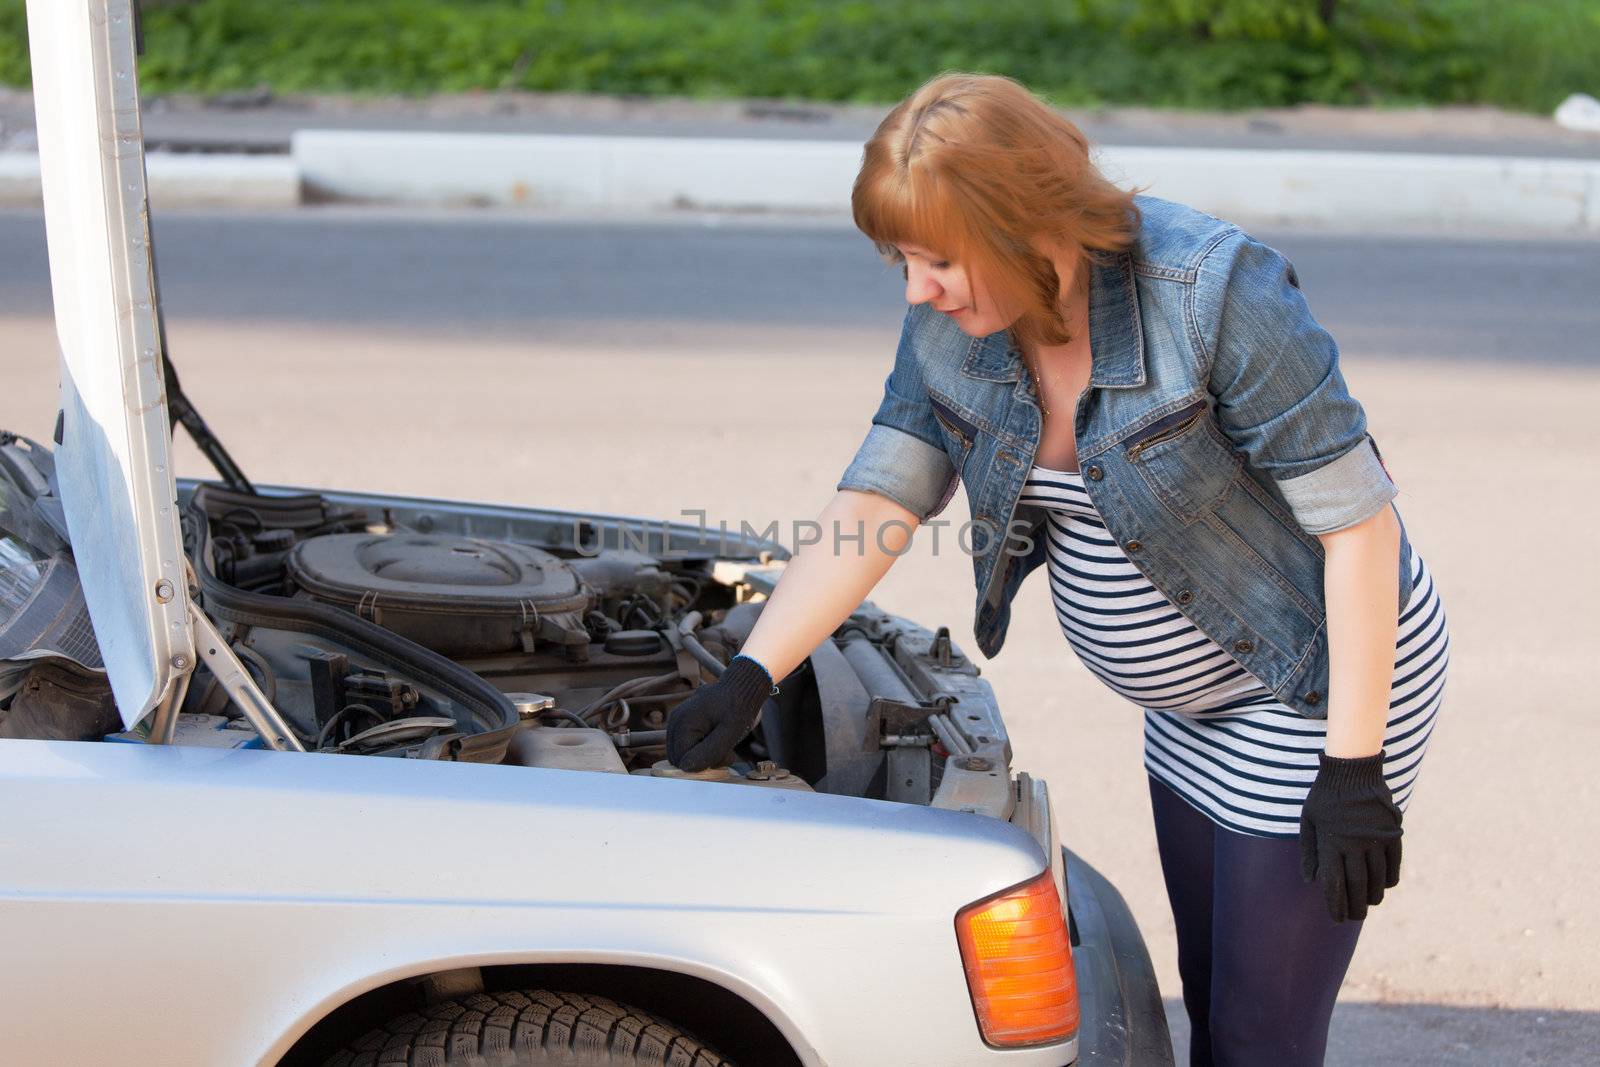 Pregnant Woman Trying to Repair the Car